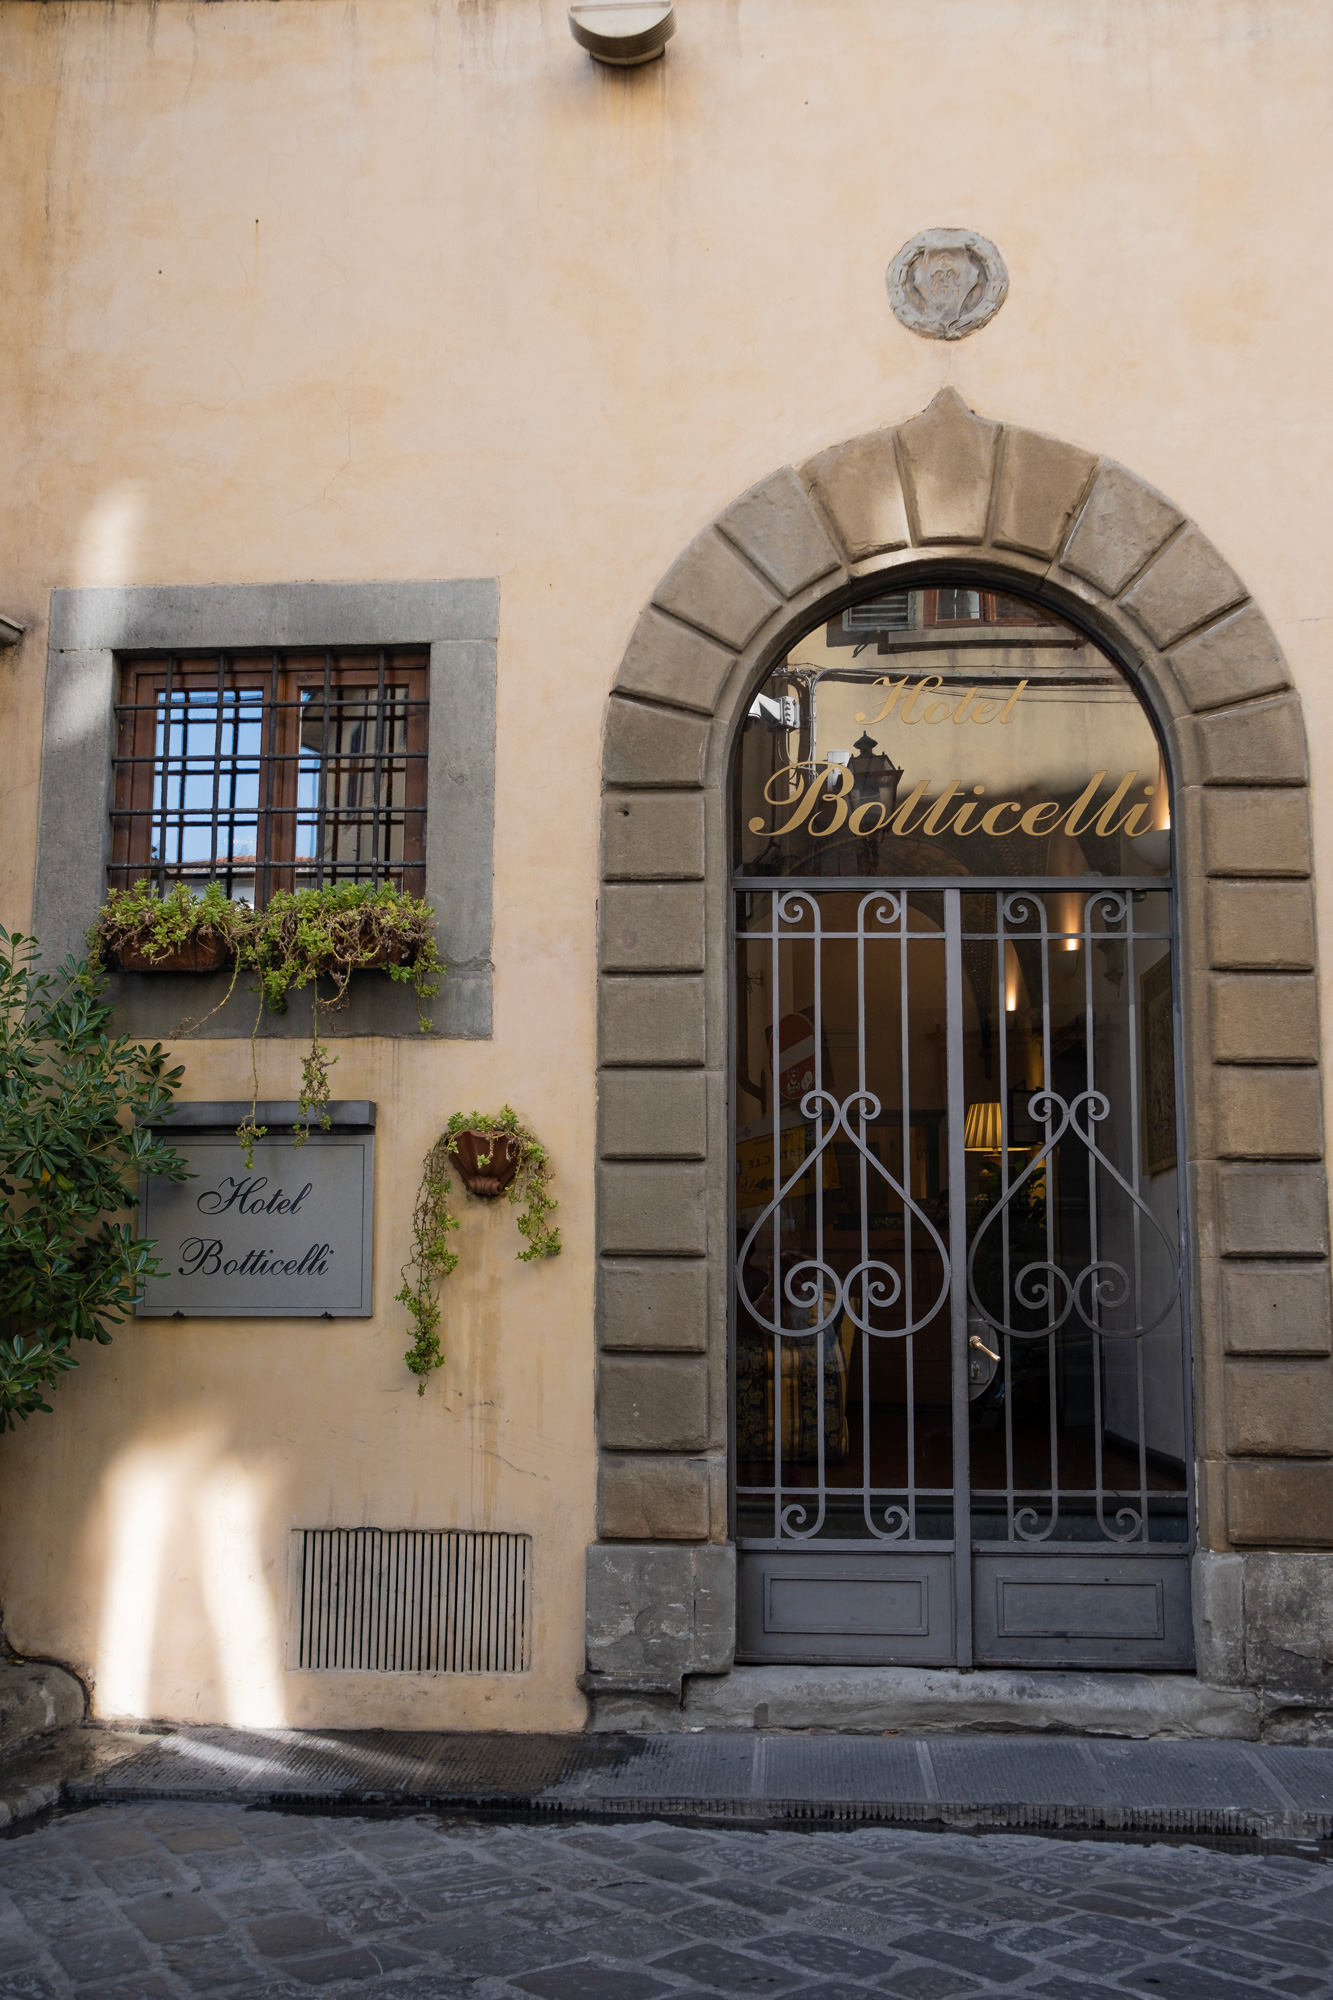 Where to stay in florence italy